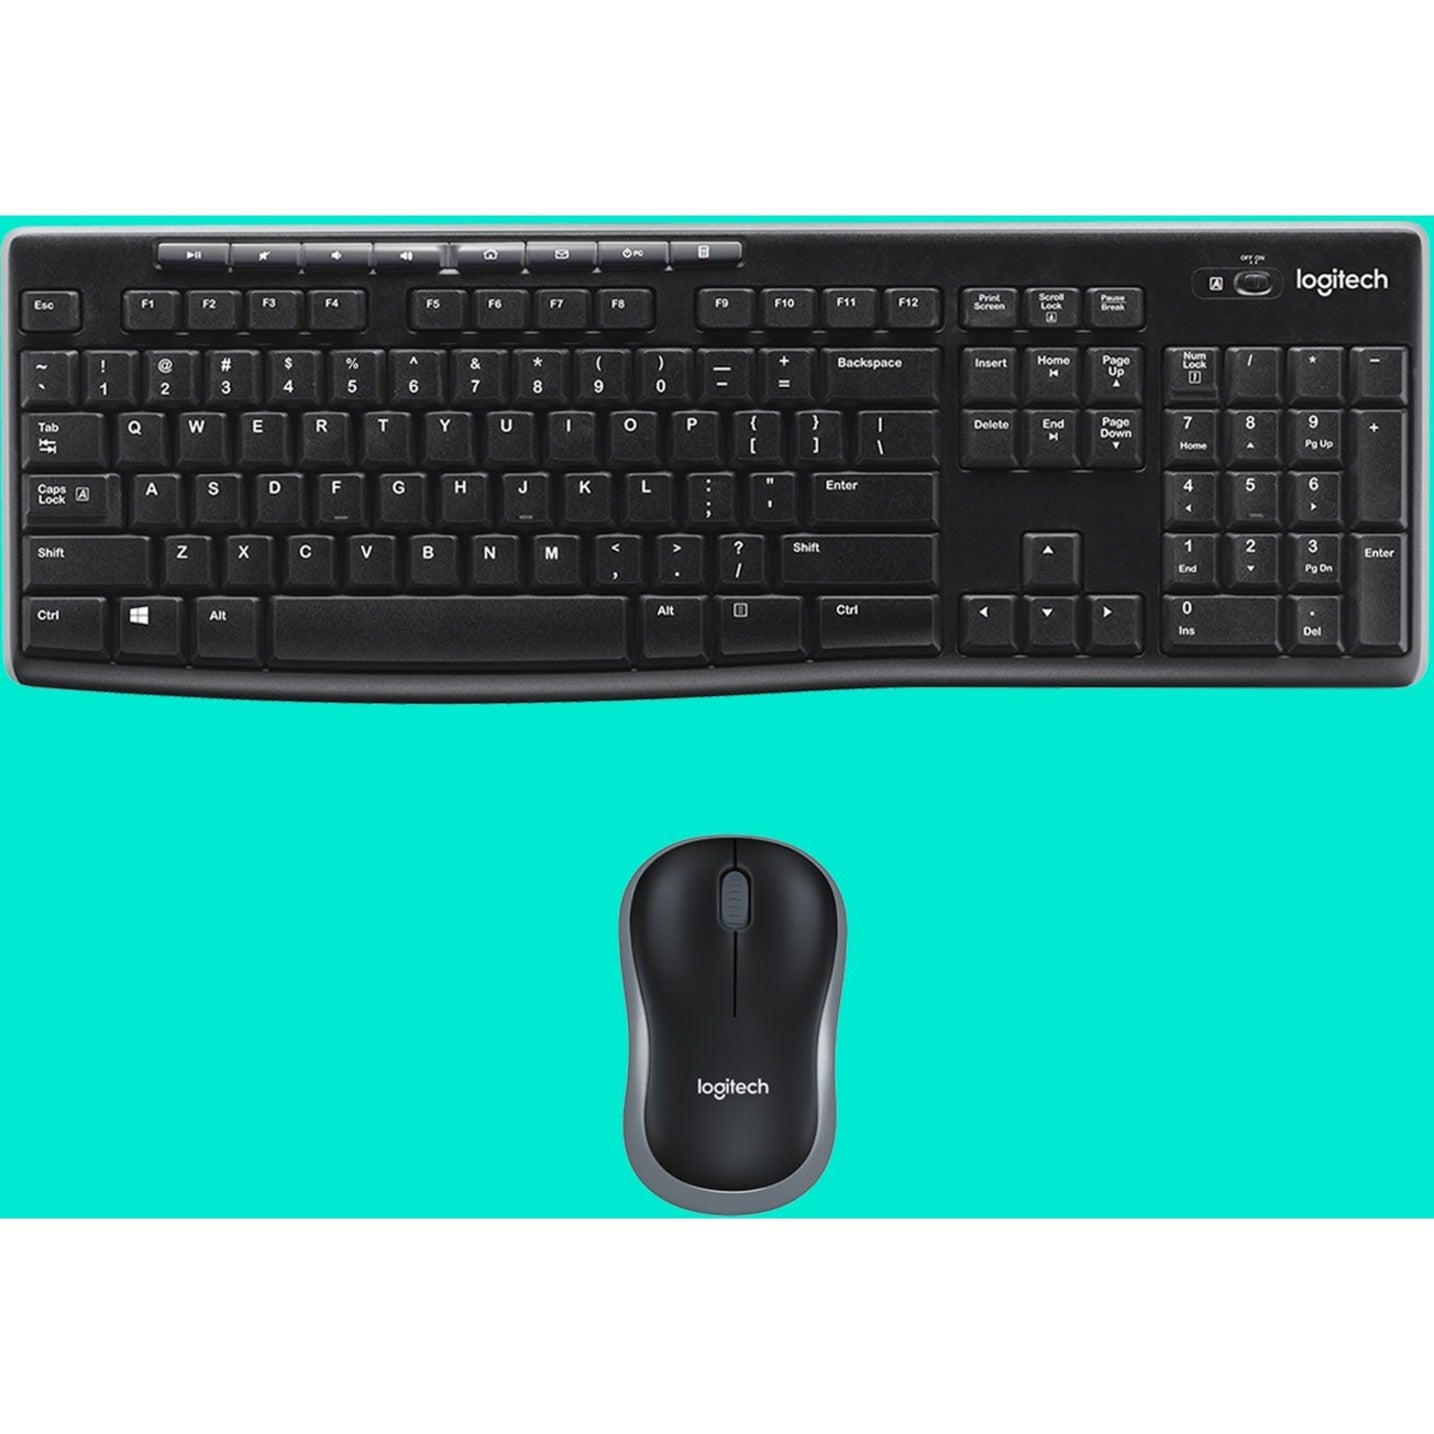 Logitech 920-010025 MK270 Wireless Keyboard And Mouse Combo, Full-size Keyboard, Spill Resistant, Volume Control, Multimedia